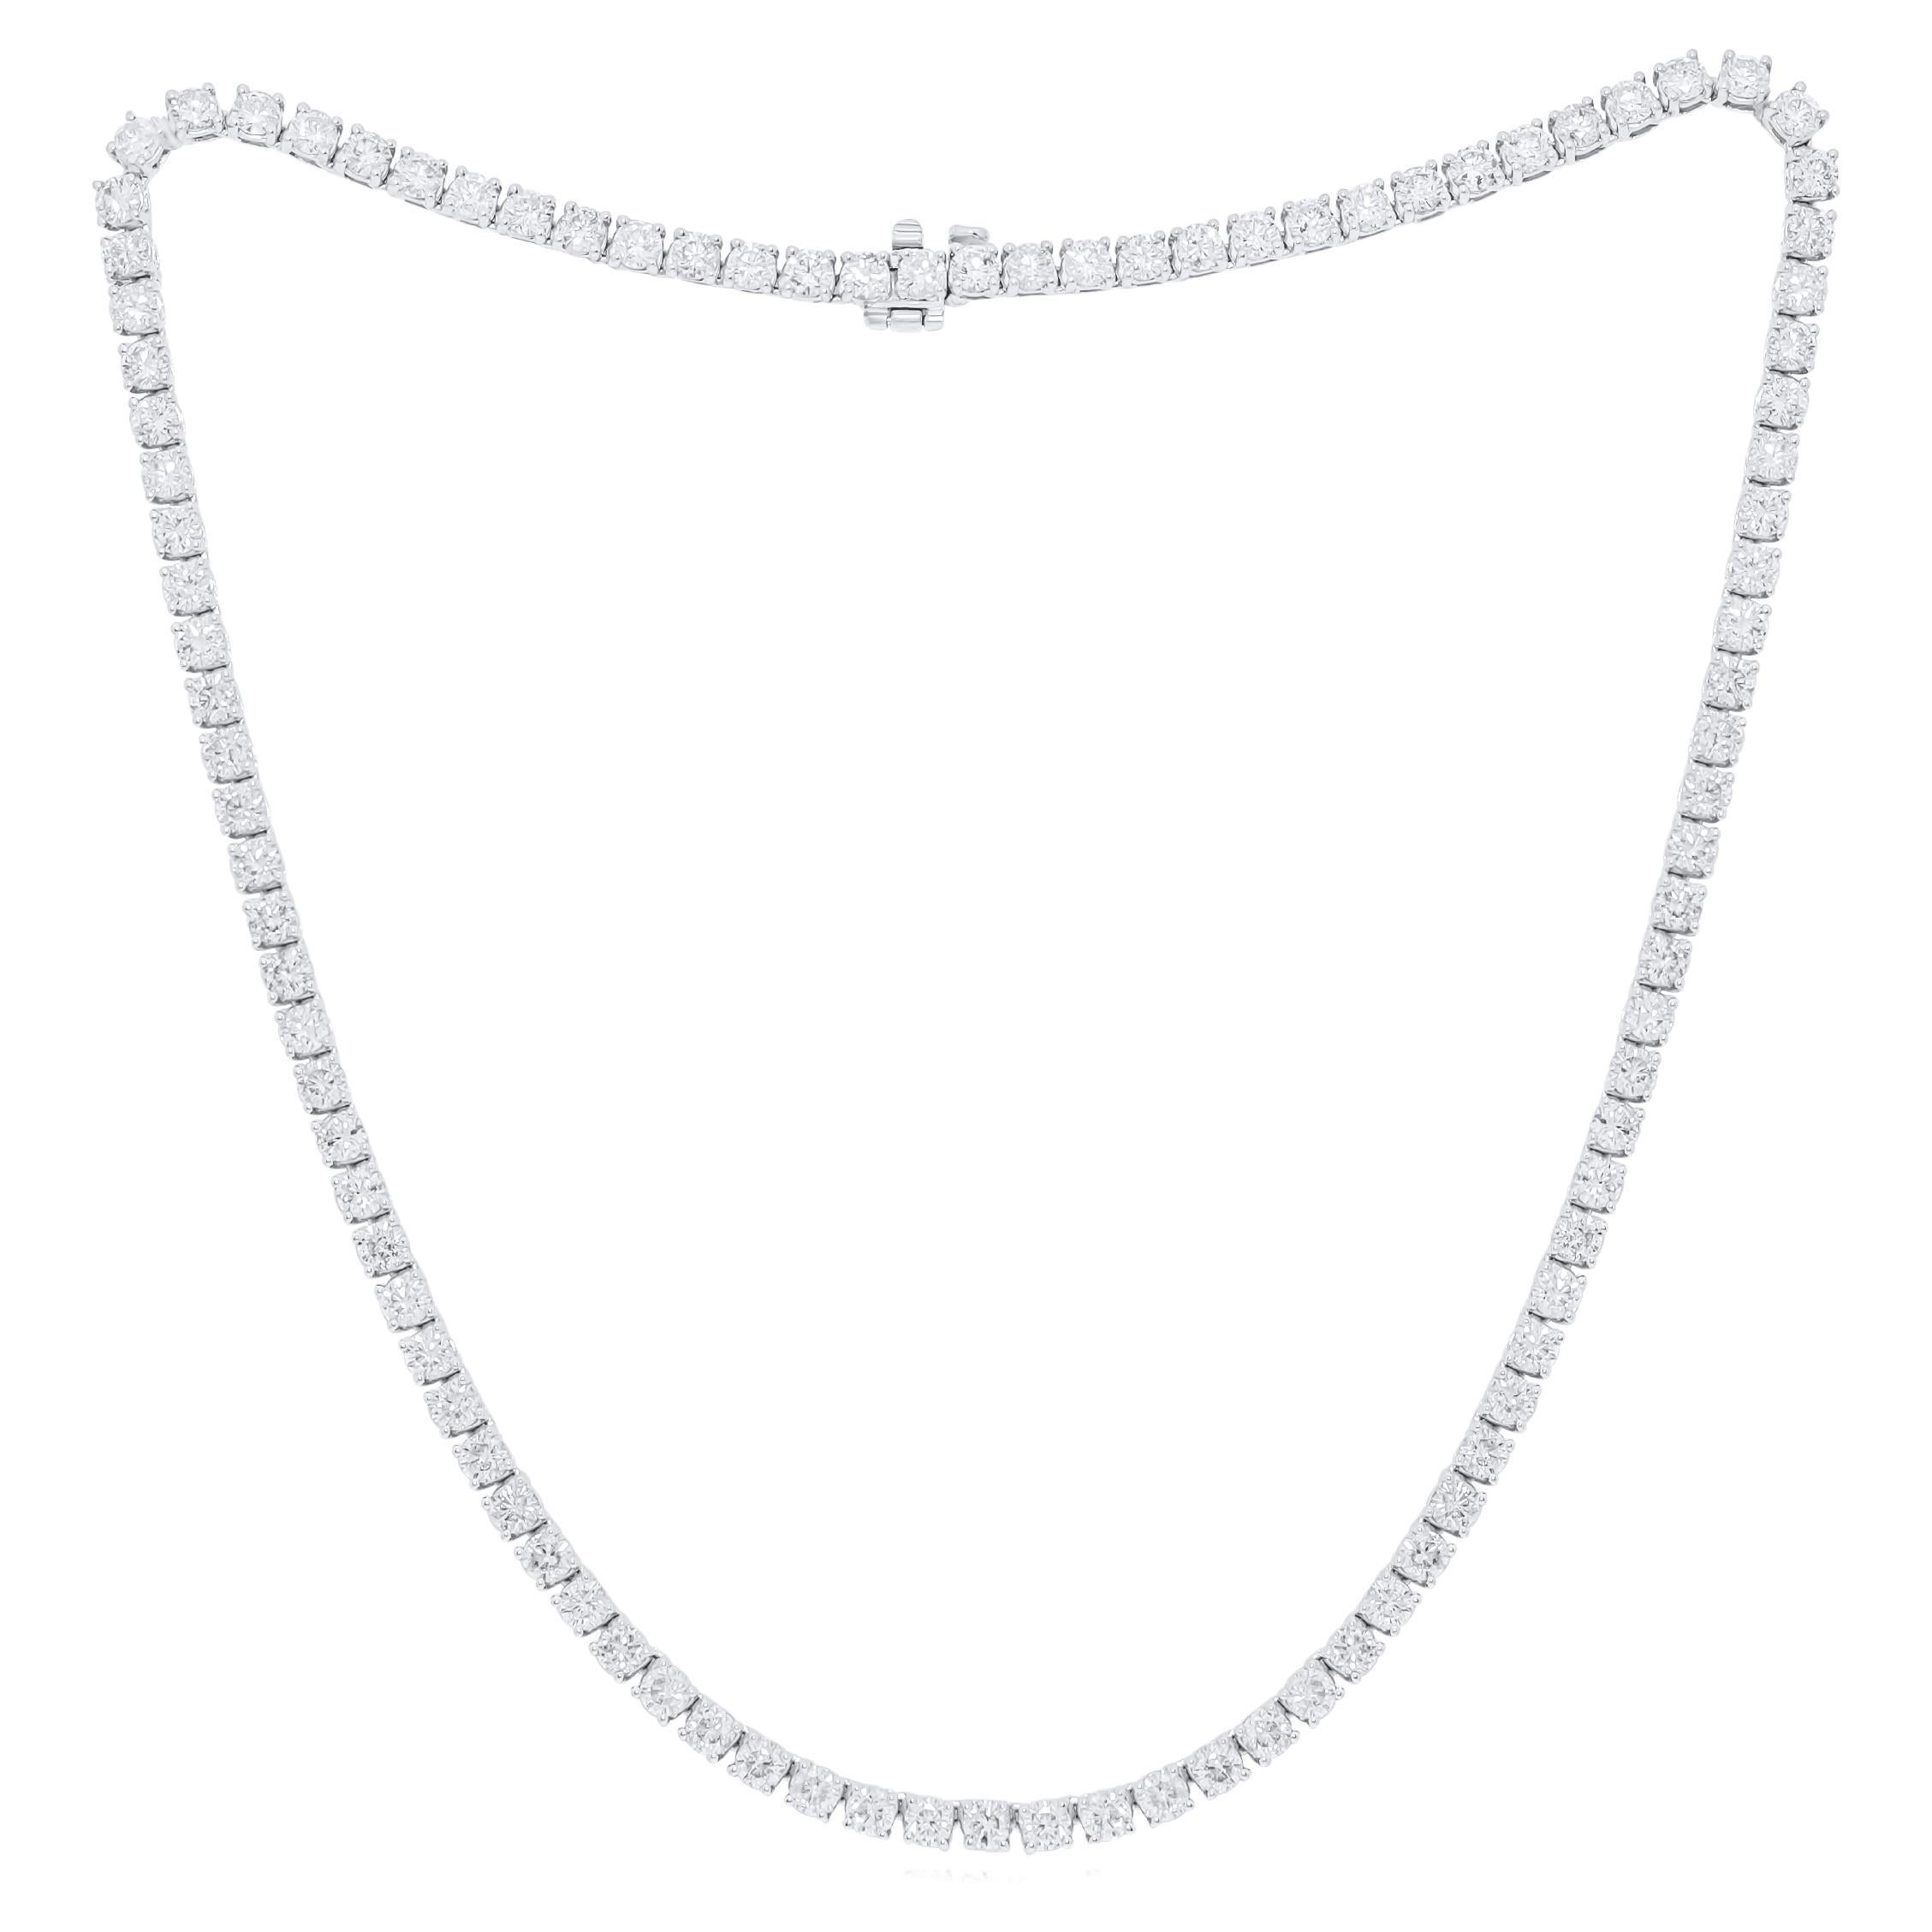 Diana M.Custom 24.20 Cts 4 Prong Diamond 18k White Gold Tennis Necklace For Sale